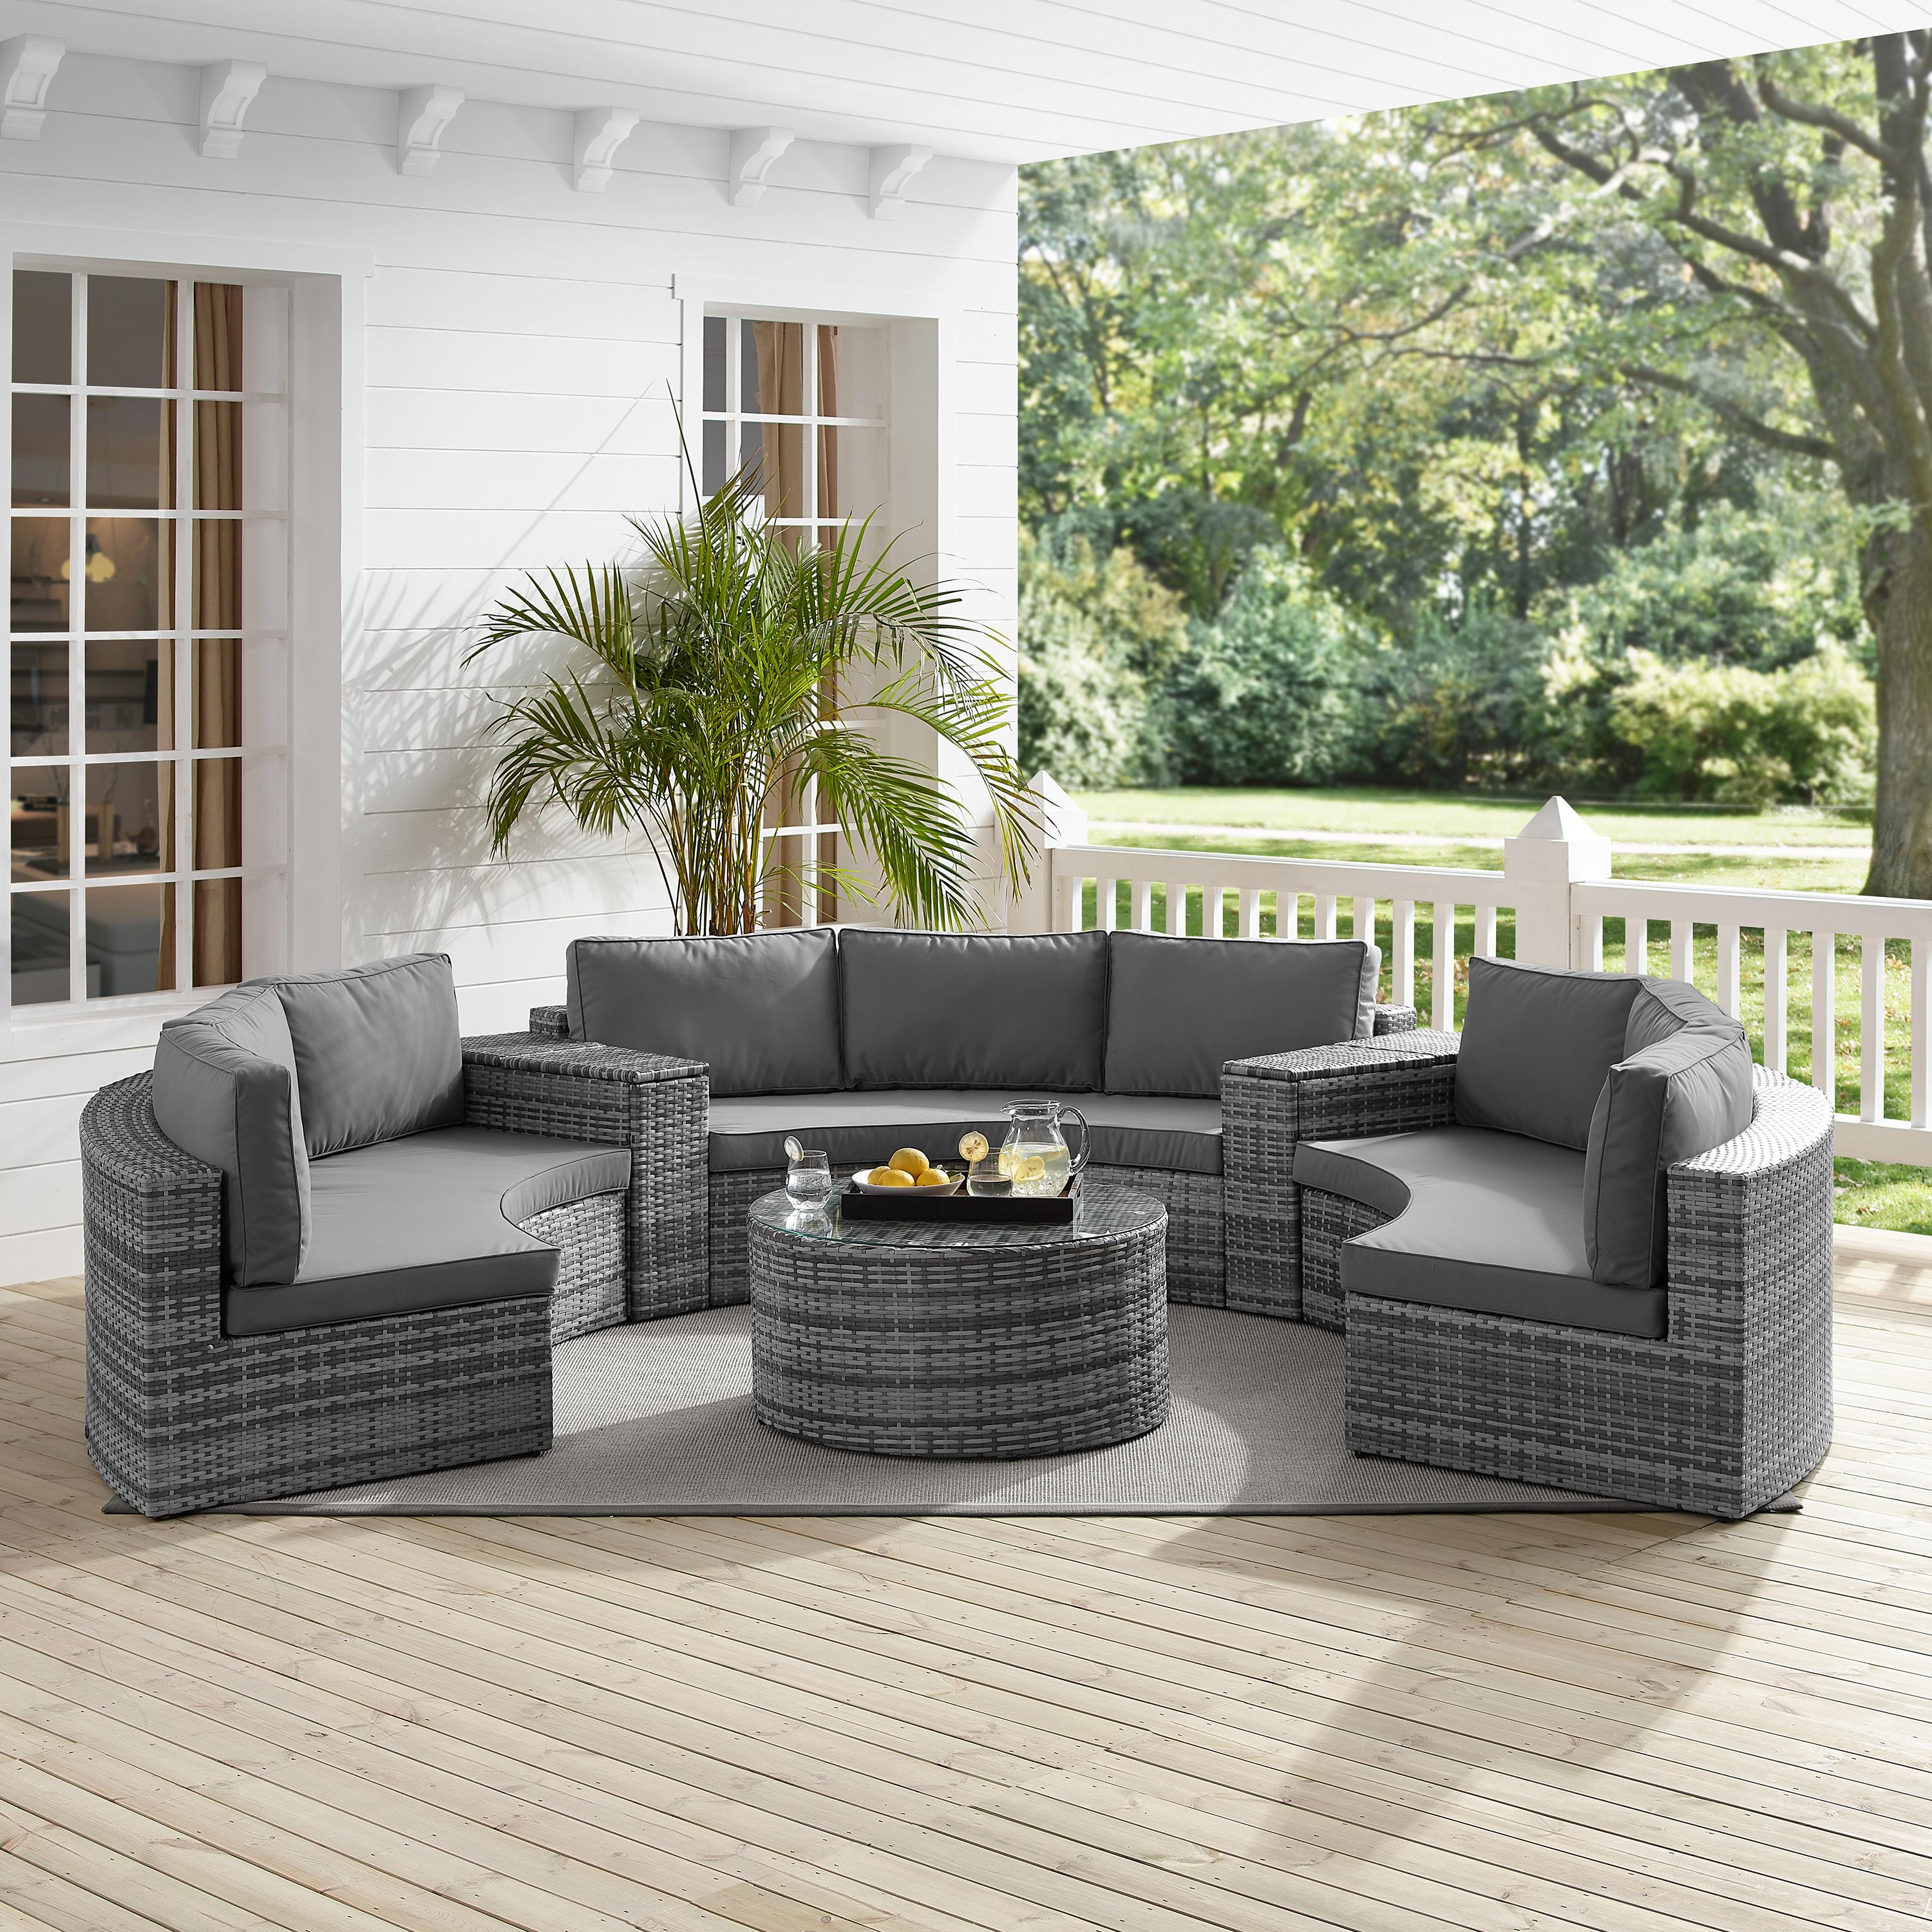 Catalina 6Pc Outdoor Wicker Sectional Set Gray/Gray - Round Glass Top Coffee Table, 3 Round Sectional Sofas, & 2 Arm Tables - image 5 of 8